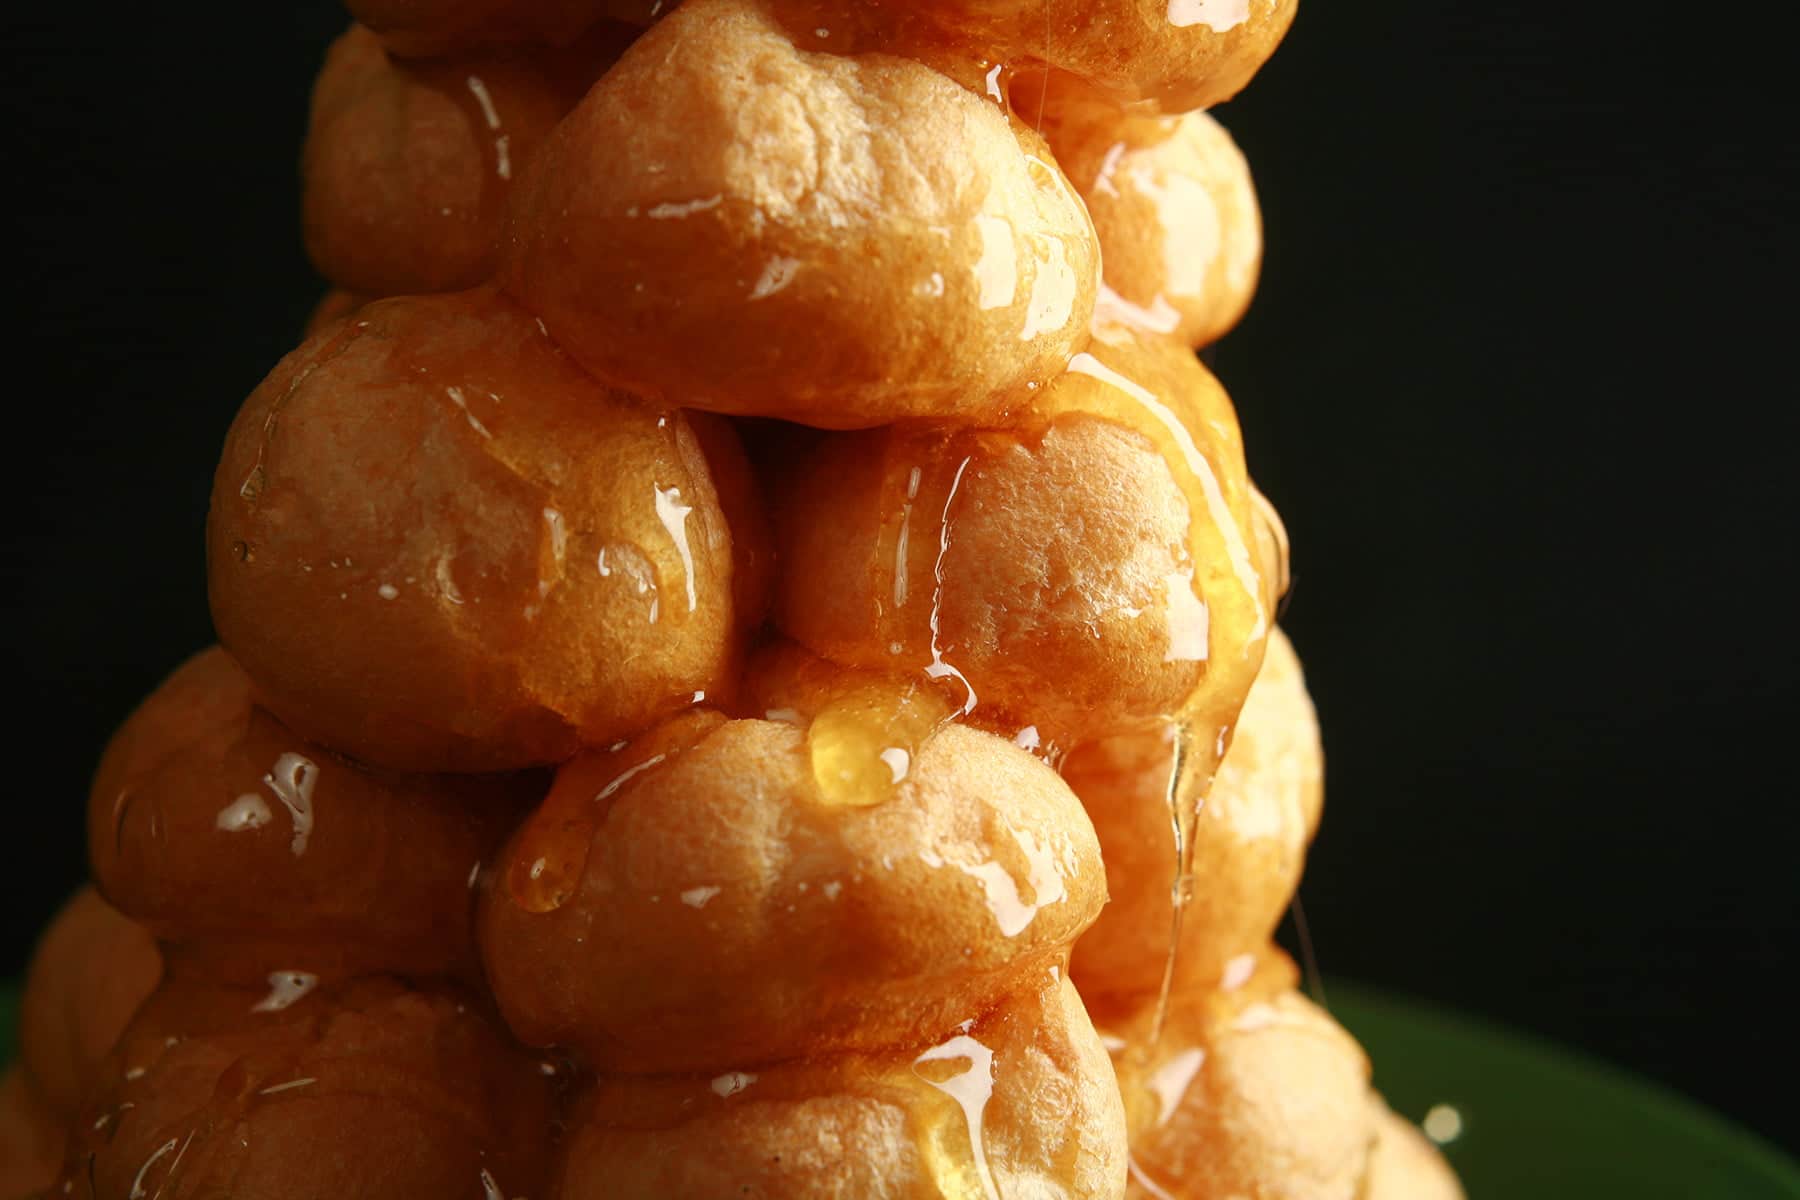 A small croquembouche - a tower made of small cream puffs held together with caramel - is pictured on a small green plate.